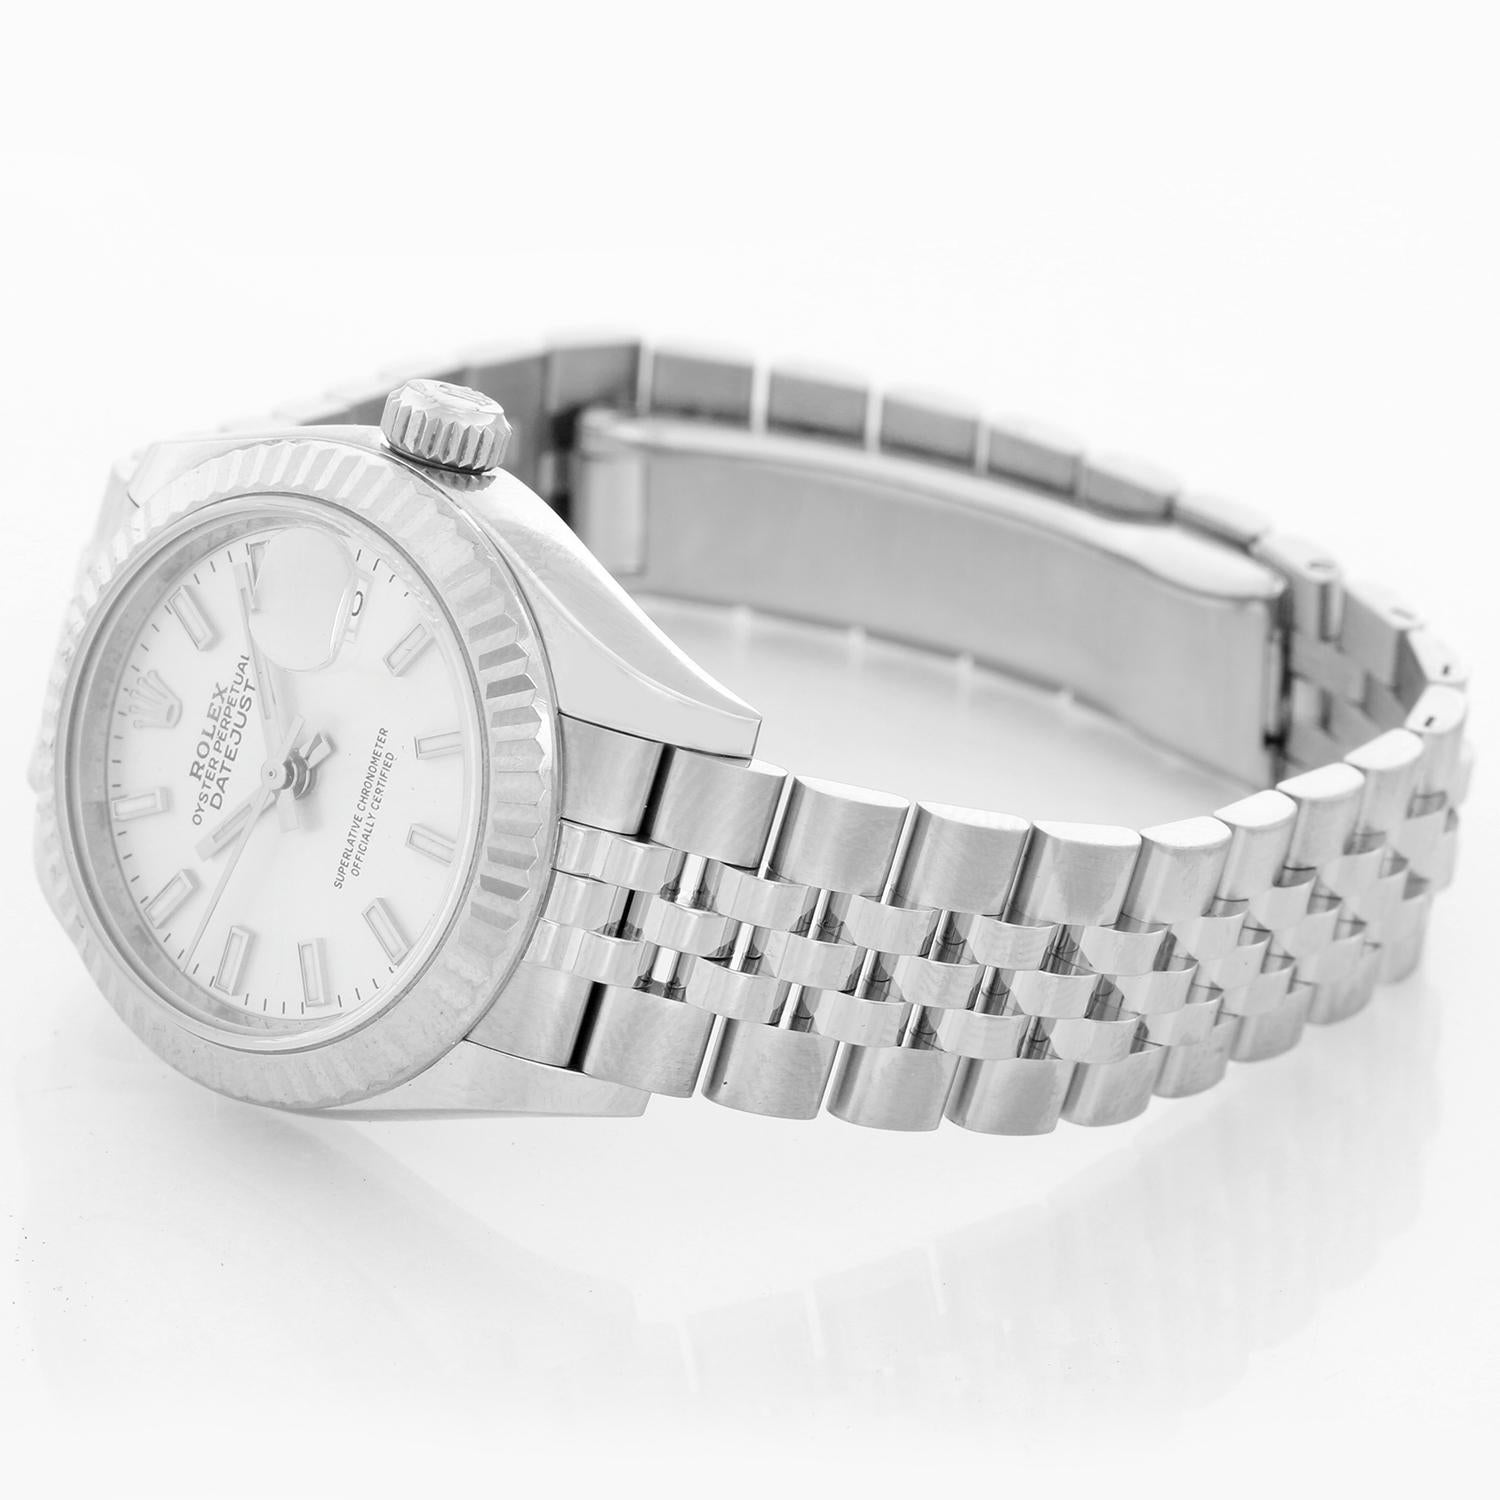 Ladies Rolex Datejust 28mm Stainless Steel Silver Dial 279174 - Automatic winding, 31 jewels, Quickset date, sapphire crystal. Stainless Steel with fluted bezel ( 28 mm). Silver Dial with index markers. Stainless Steel jubilee bracelet. Pre-owned